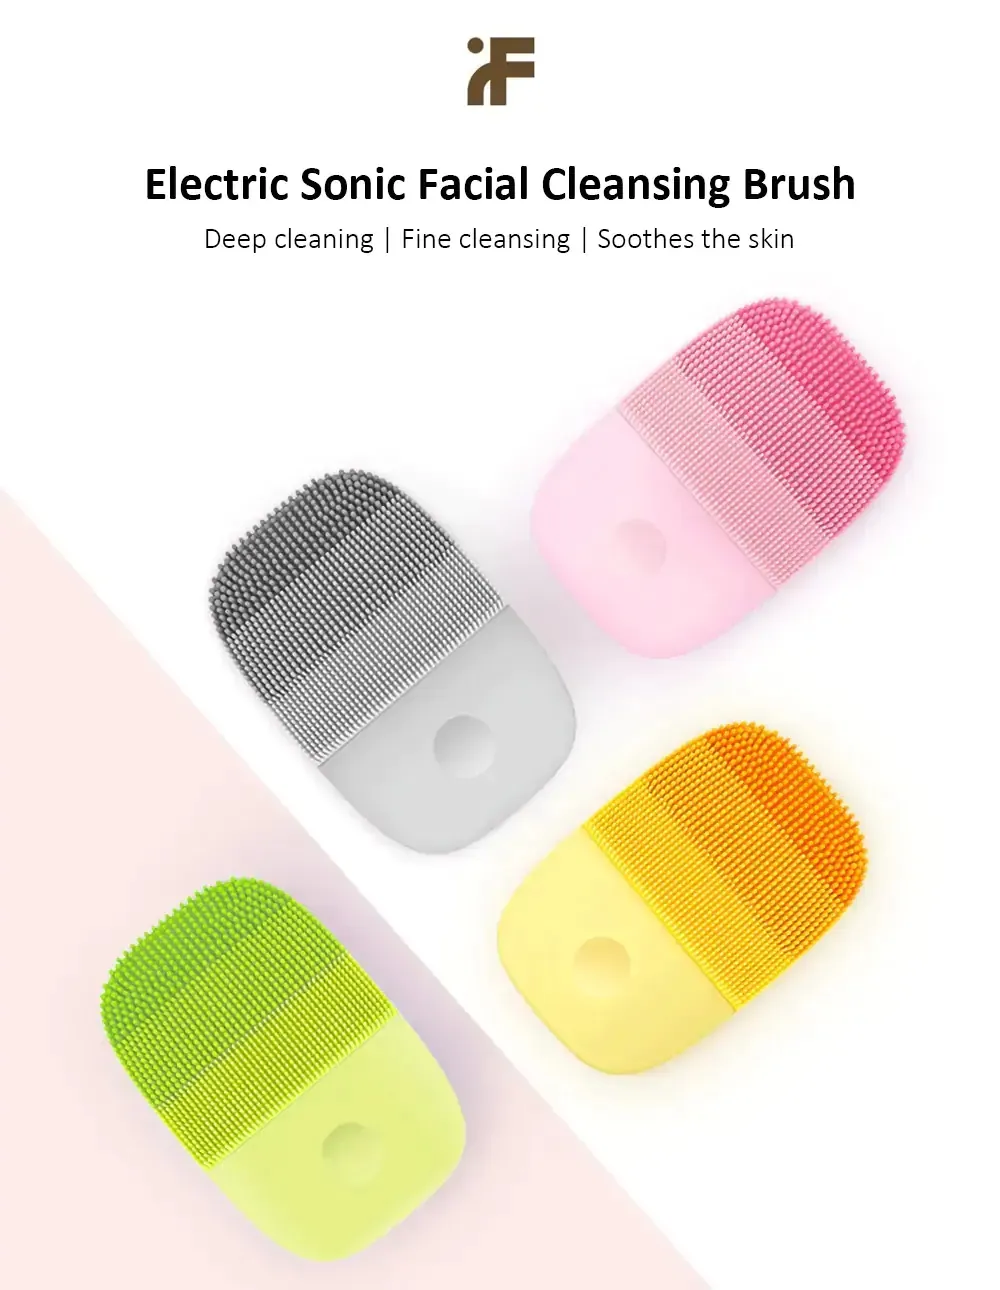 Xiaomi Youpin Inface Facial Limpeza Escova Mijia Deep Cleansing Rosto Impermeável Silicone Elétrico Sonic Cleanser Clean Aparaat C1